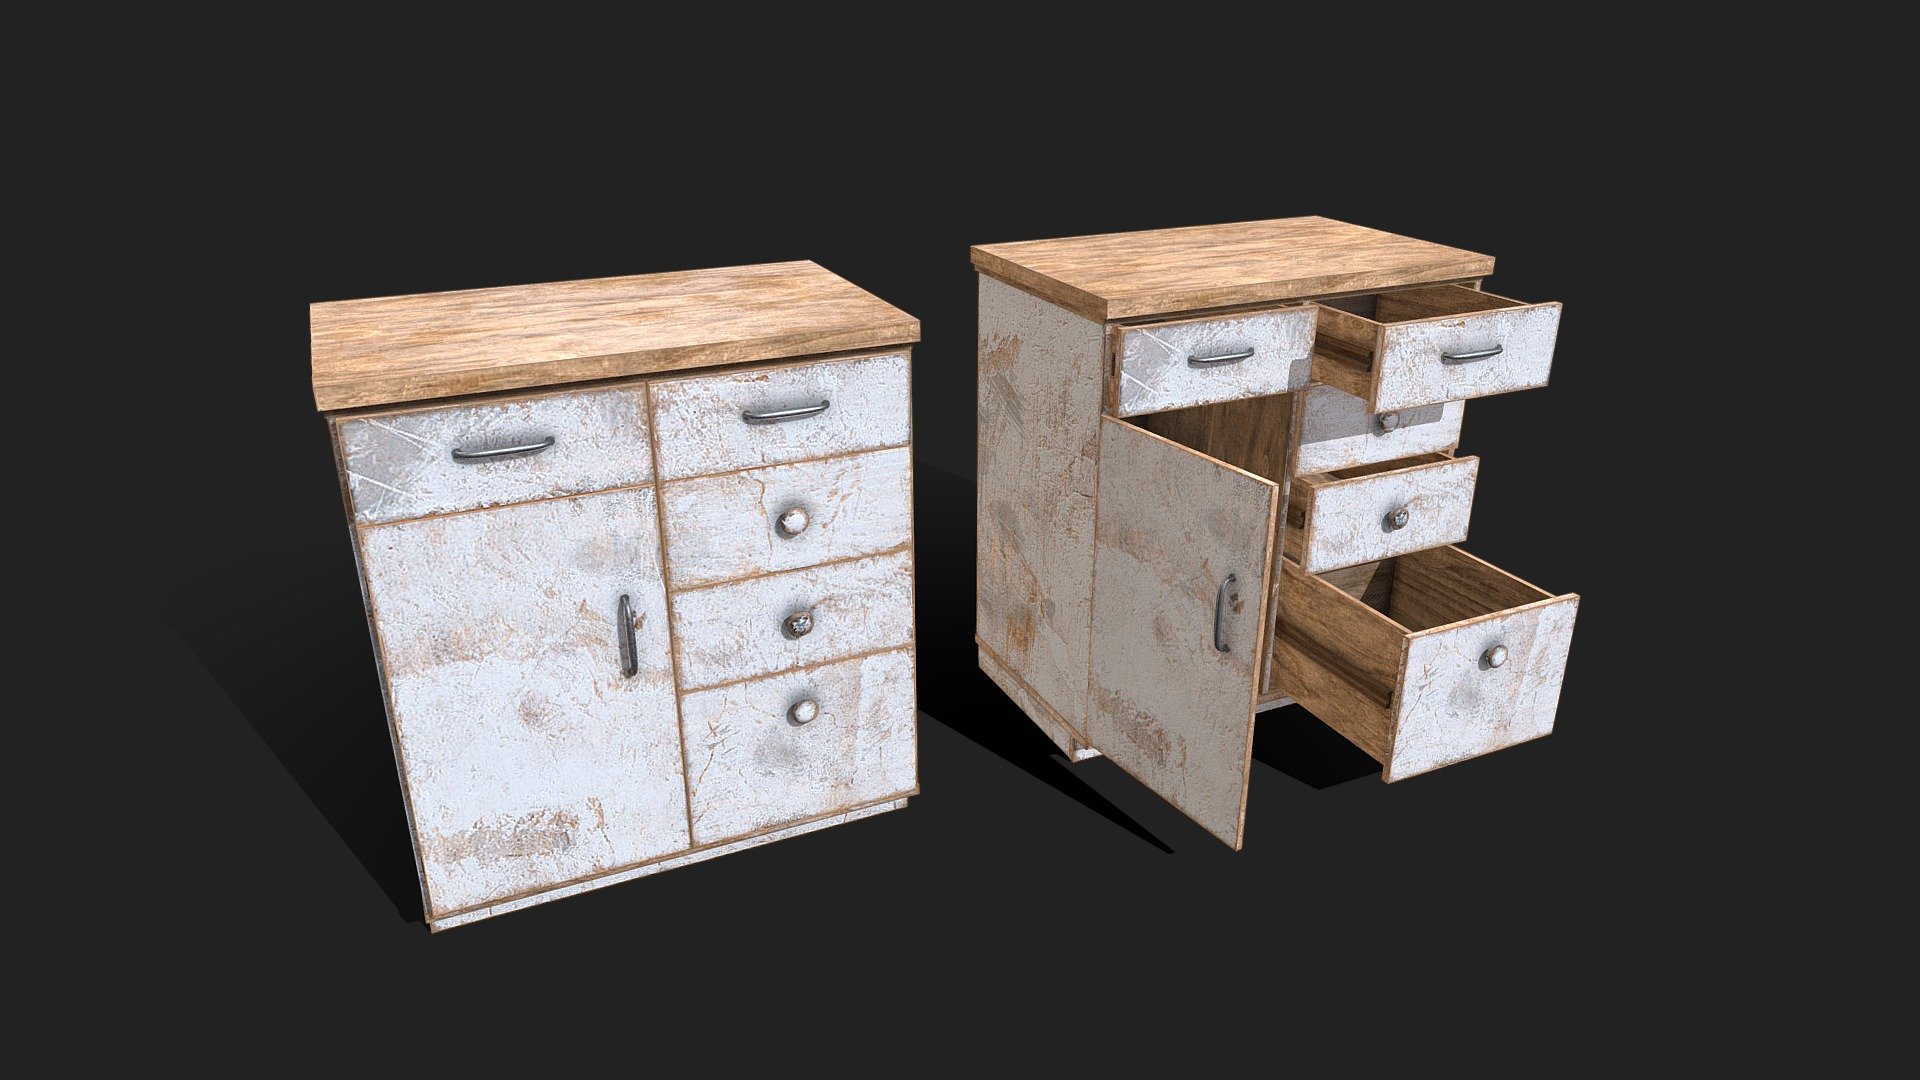 2048x2048 texture packs (PBR Metal Rough, Unity HDRP, Unity Standard Metallic and UE):

PBR Metal Rough: BaseColor, AO, Height, Normal, Roughness and Metallic;

Unity HDRP: BaseColor, MaskMap, Normal;

Unity Standard Metallic: AlbedoTransparency, MetallicSmoothness, Normal;

Unreal Engine: BaseColor, Normal, OcclusionRoughnessMetallic;

The package also has the .fbx, .obj, .dae and .blend file 3d model